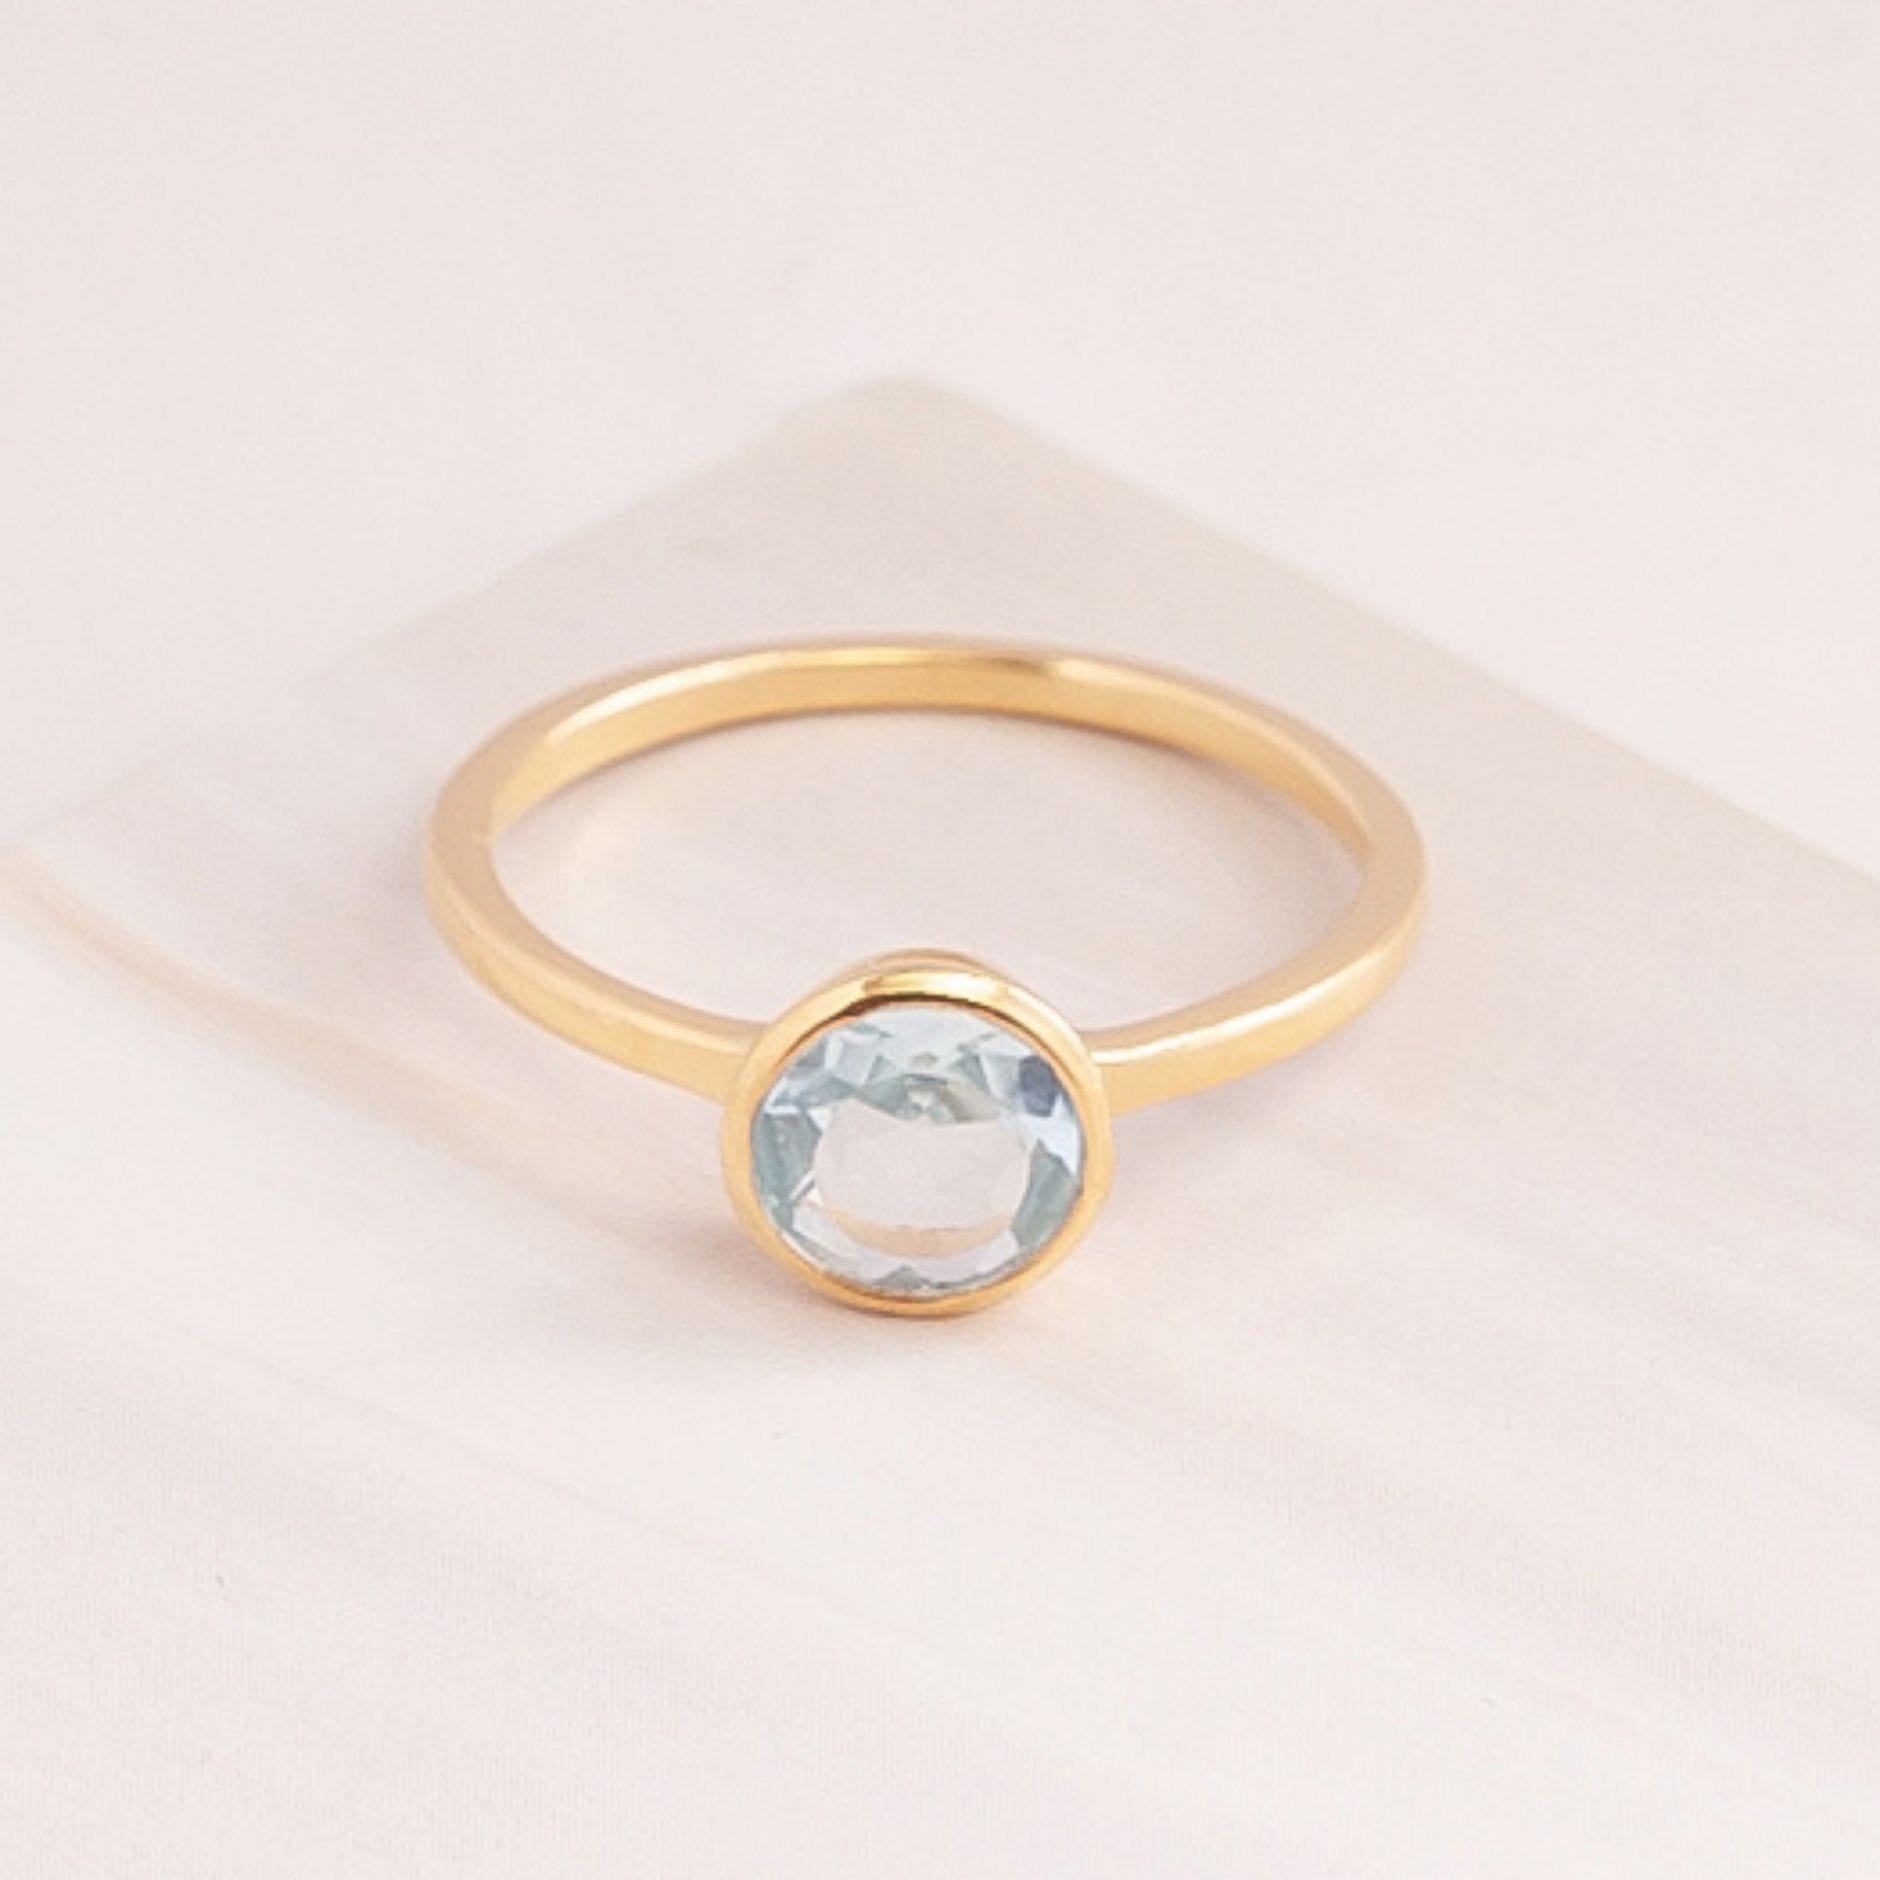 Emblem Jewelry Rings Blue Topaz / Round Signature Candy Gemstone Stack Rings (Ring Size 7)